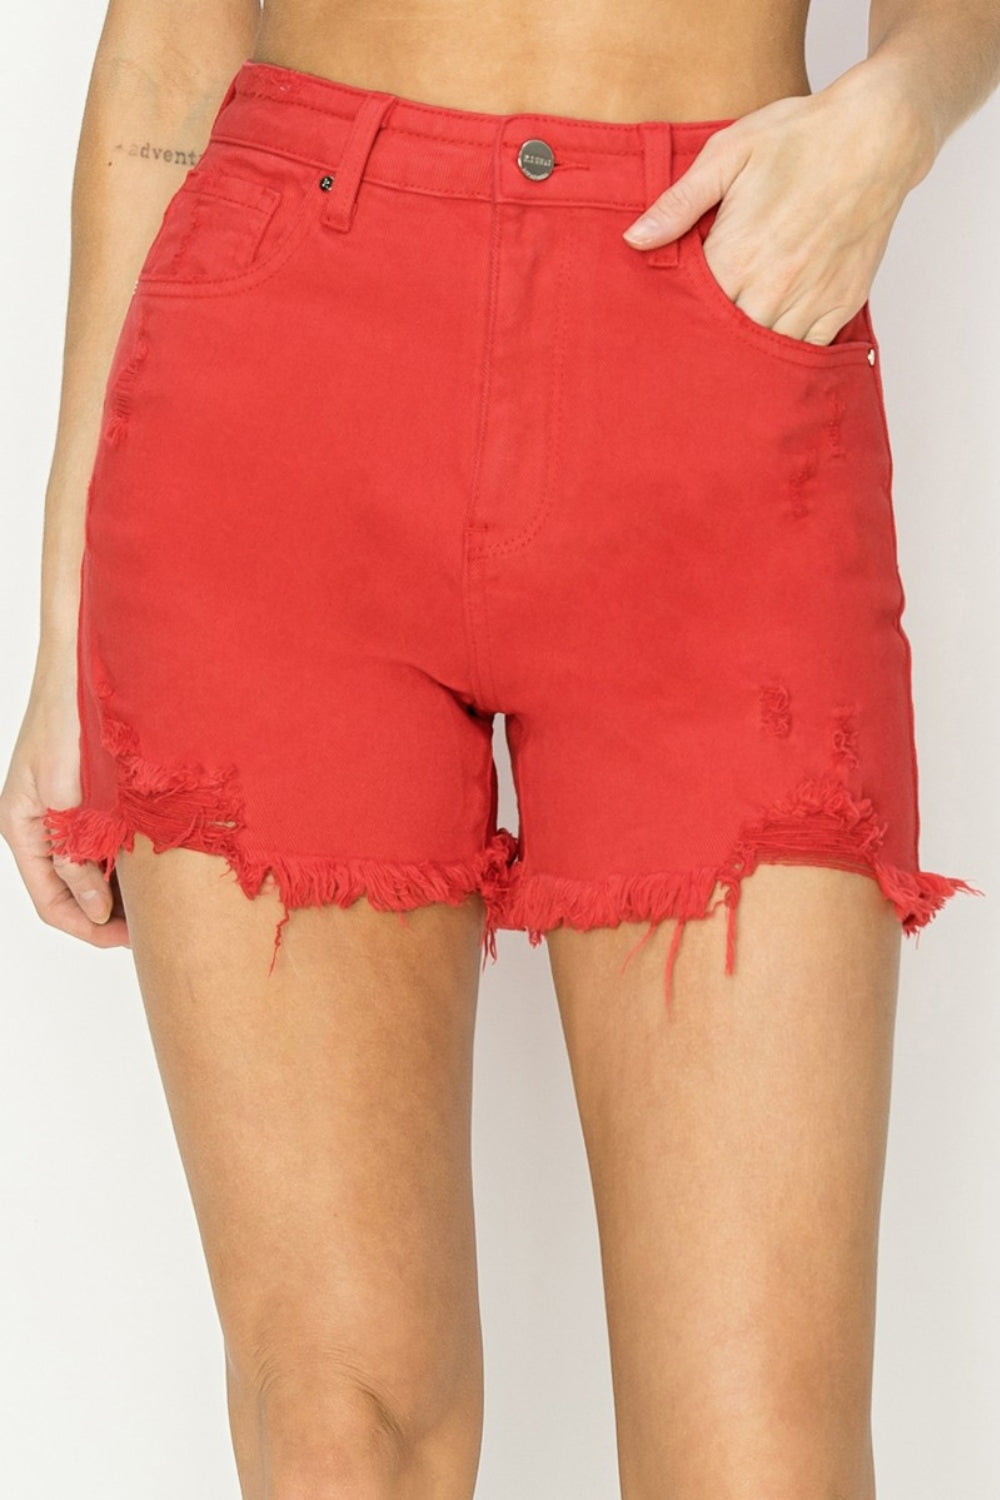 Sure! High Rise Distressed Denim Shorts are the perfect combination of style and edge. With a flattering high waist and distressed detailing, these shorts are sure to make a statement. Pair them with a graphic tee for a casual look, or dress them up with a blouse and heels for a night out. S-XL